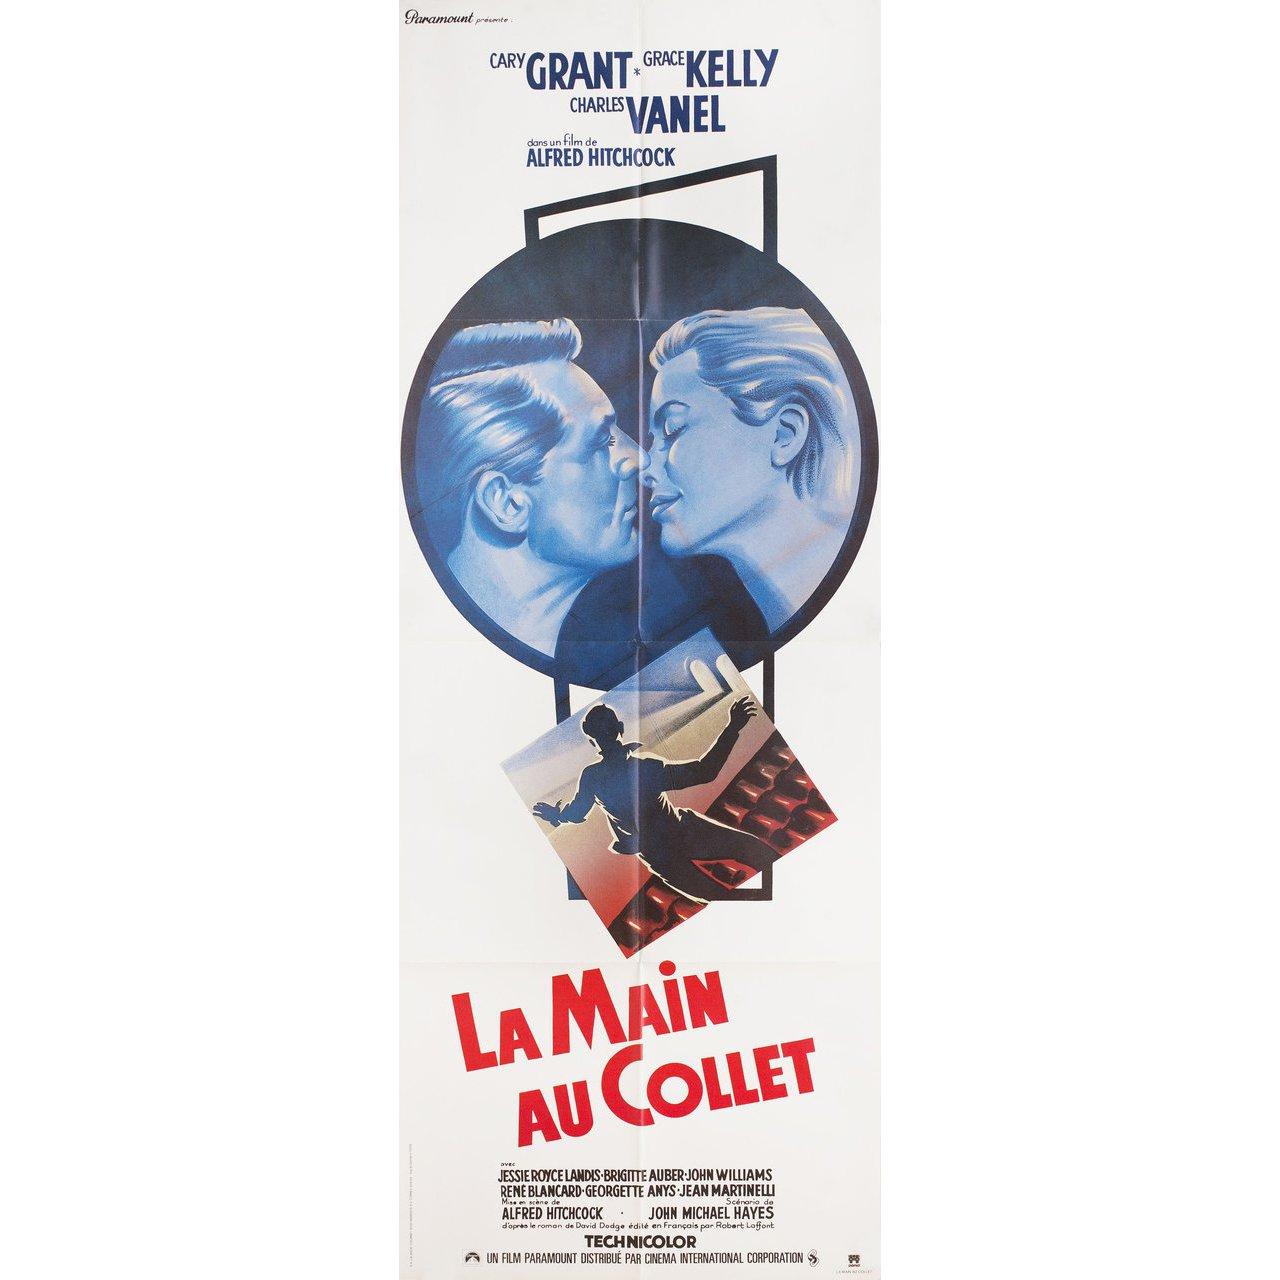 Original 1980s re-release French pantalon poster for the 1955 film To Catch a Thief directed by Alfred Hitchcock with Cary Grant / Grace Kelly / Jessie Royce Landis / John Williams. Very good-fine condition, folded. Many original posters were issued